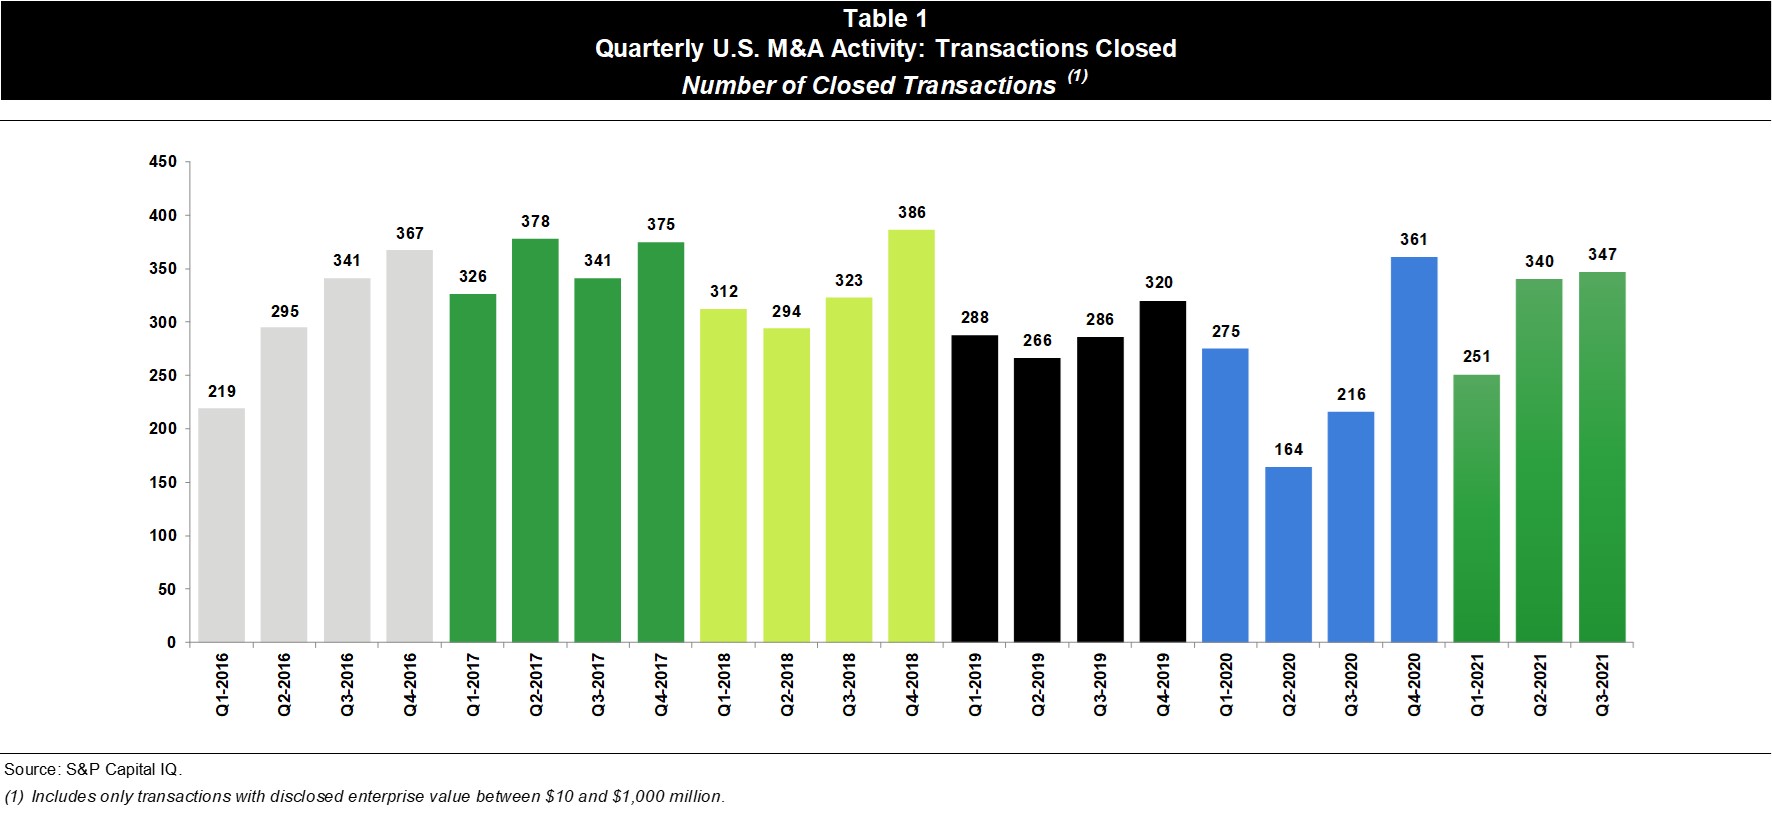 Quarterly U.S. M&A Activity: Transactions Closed, number of closed transactions